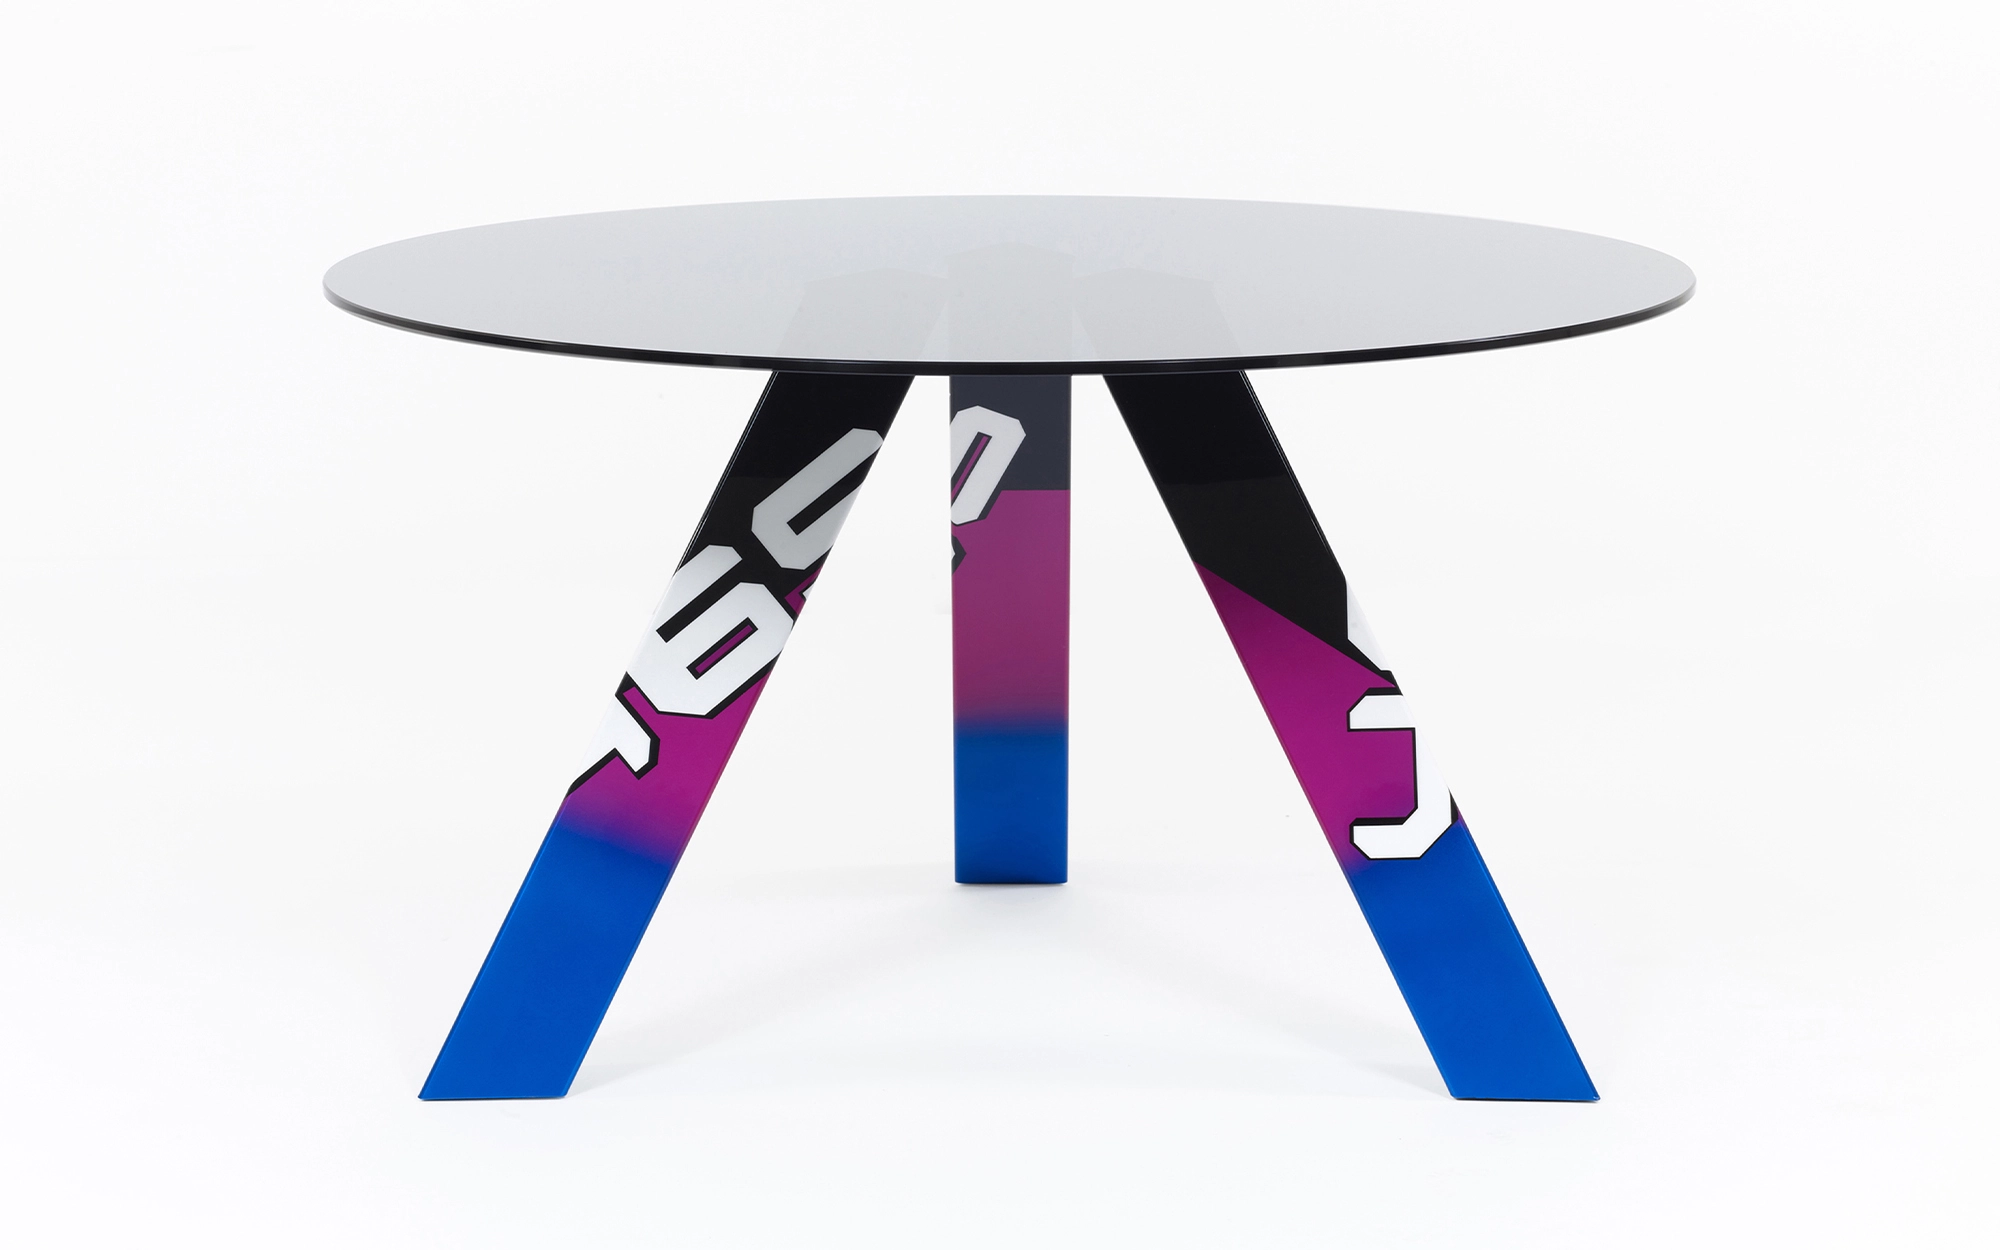 465 Table - Konstantin Grcic - Console - Galerie kreo